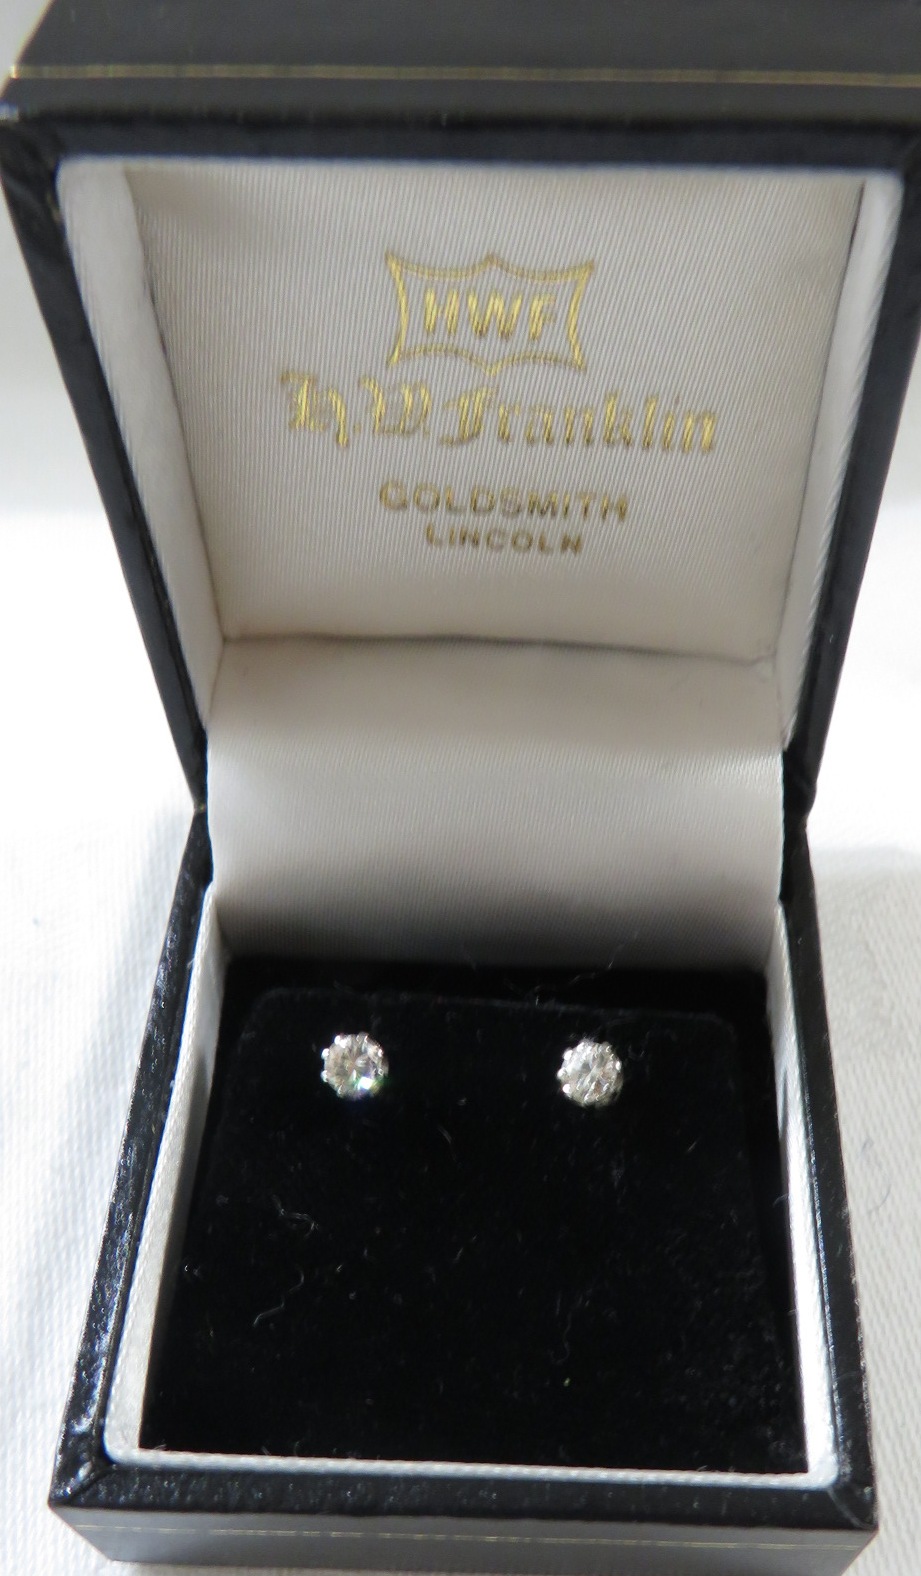 A pair of solitaire diamond ear studs, brilliant cut, each stone estimated at 0.2 carat, white metal